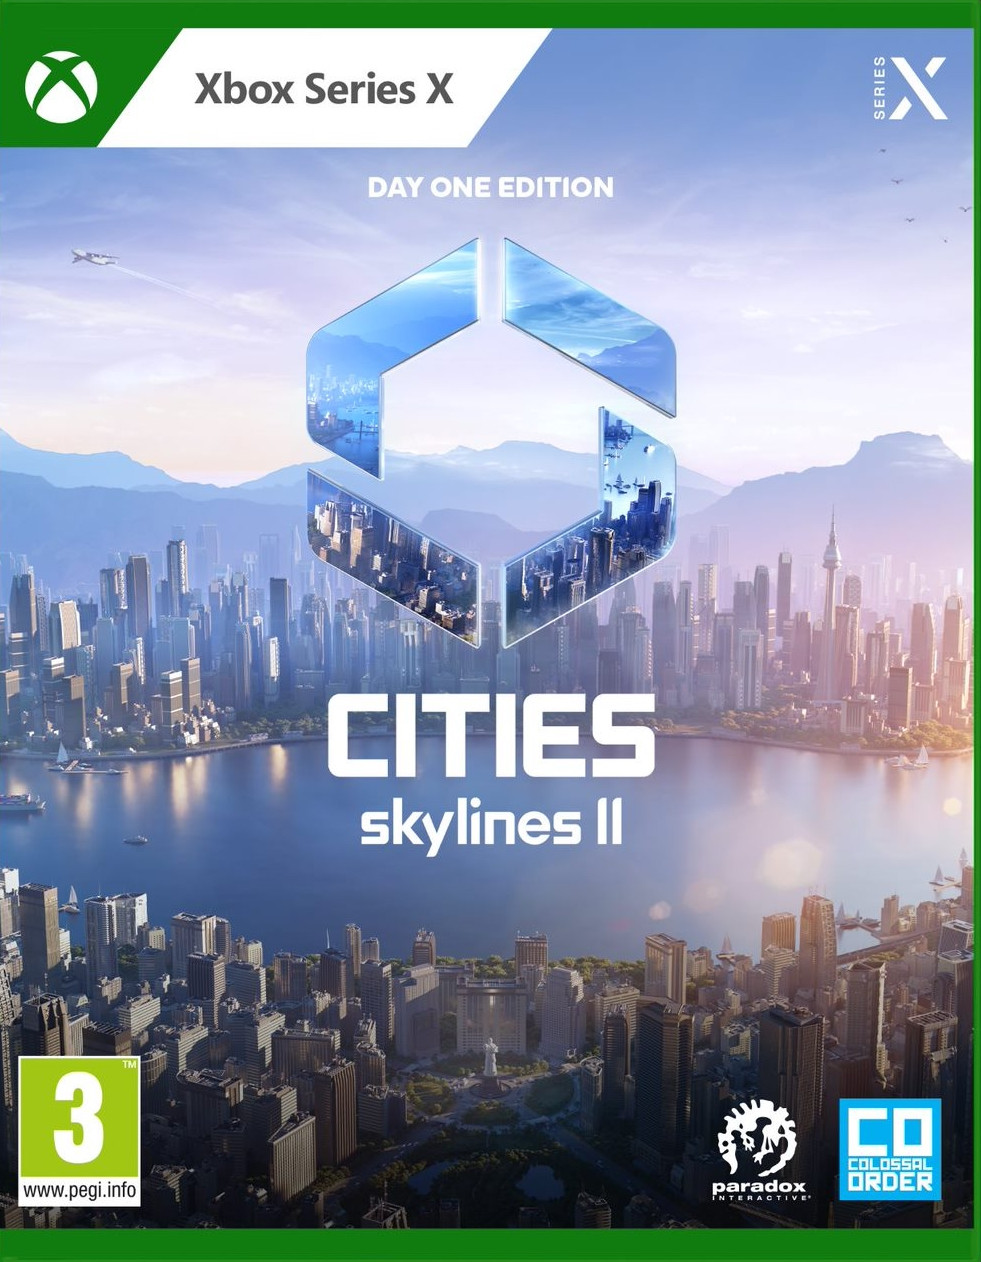 Cities Skylines 2 - Day One Edition (Xbox Series X), Paradox Interactive